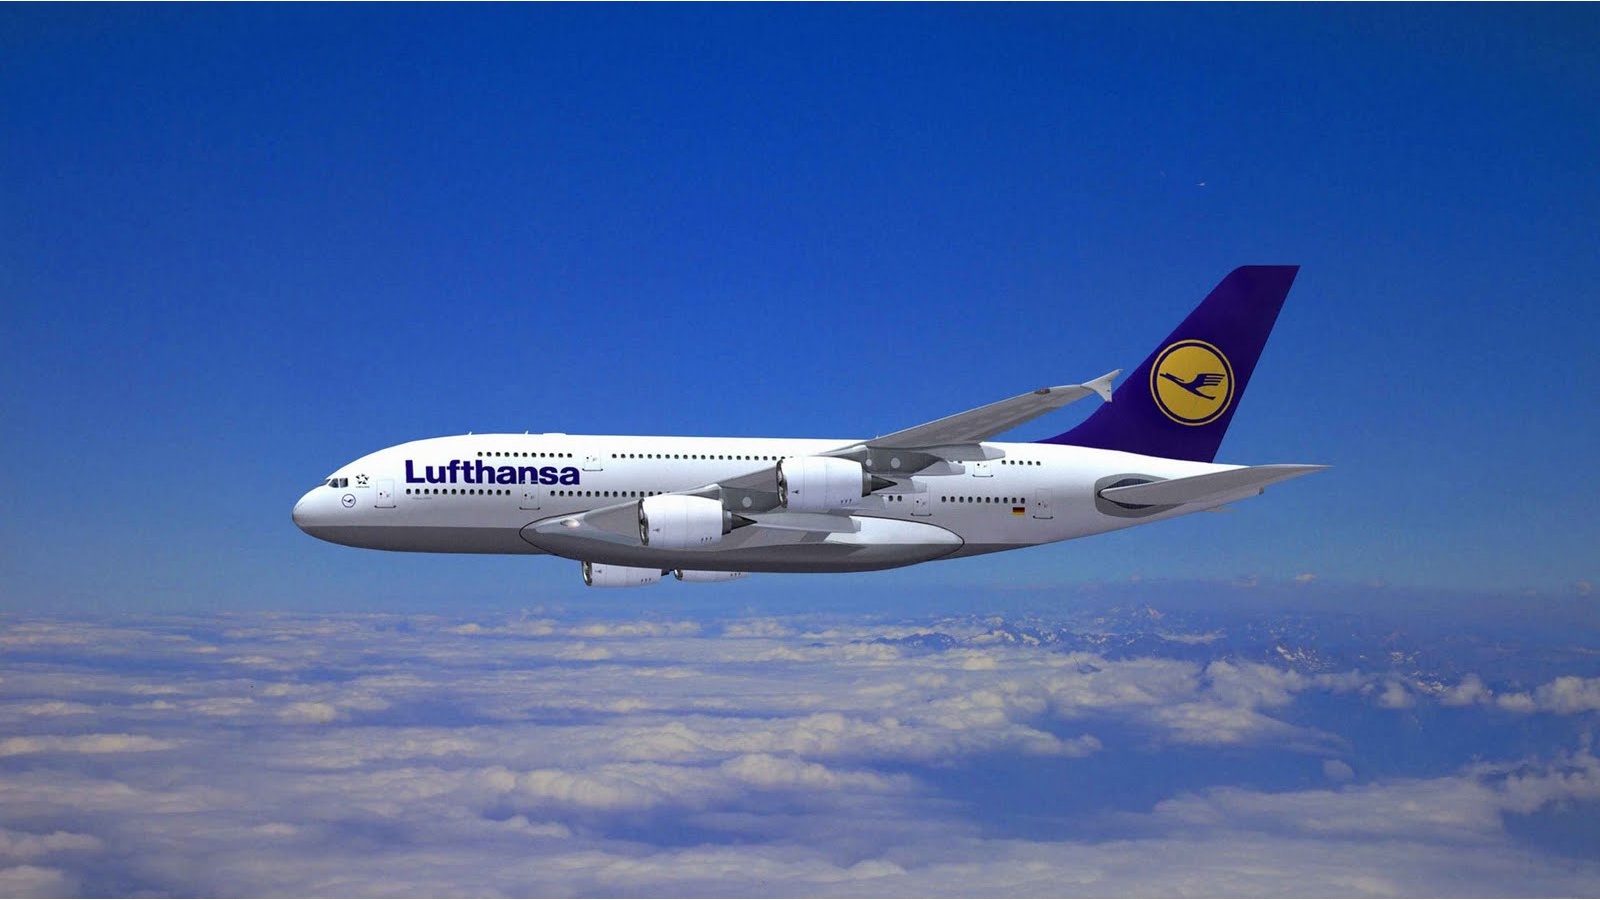 Hd Widescreen Images Collection Of Airbus A380 - Lufthansa Munich To Tel Aviv , HD Wallpaper & Backgrounds